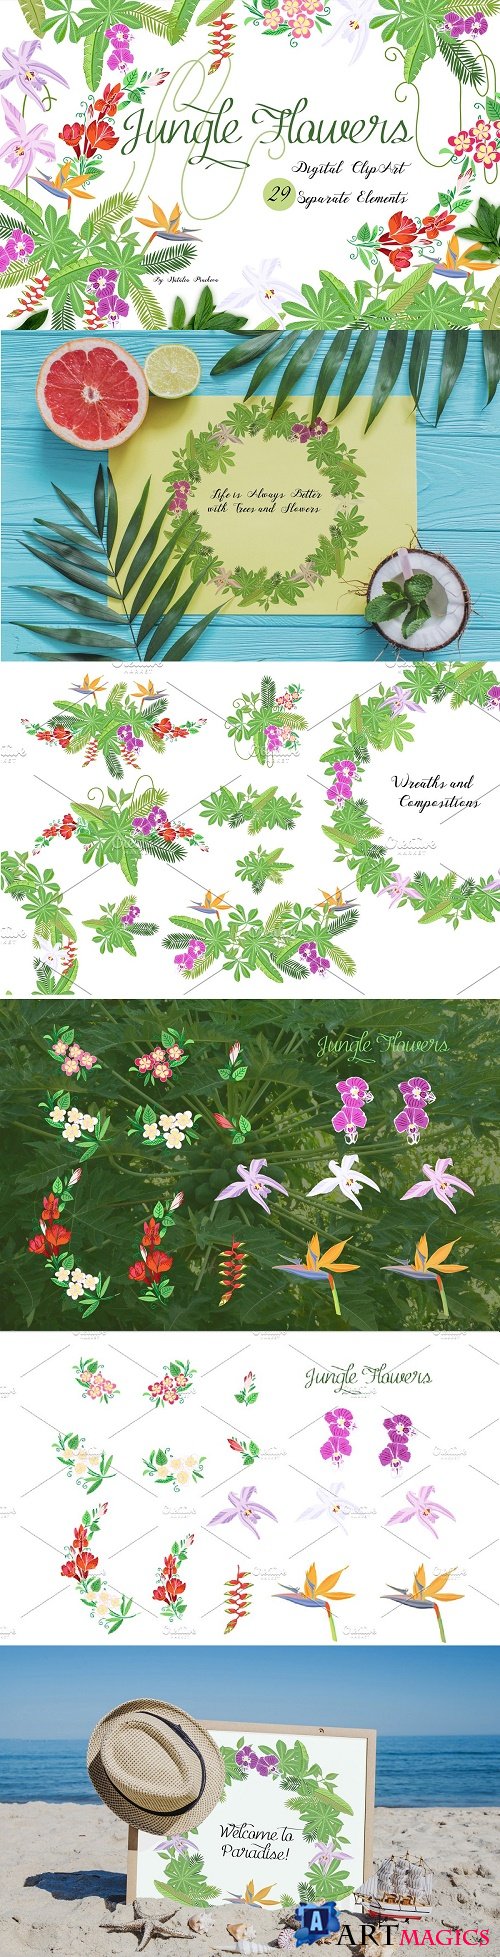 Jungle clipart with flowers - 3686966